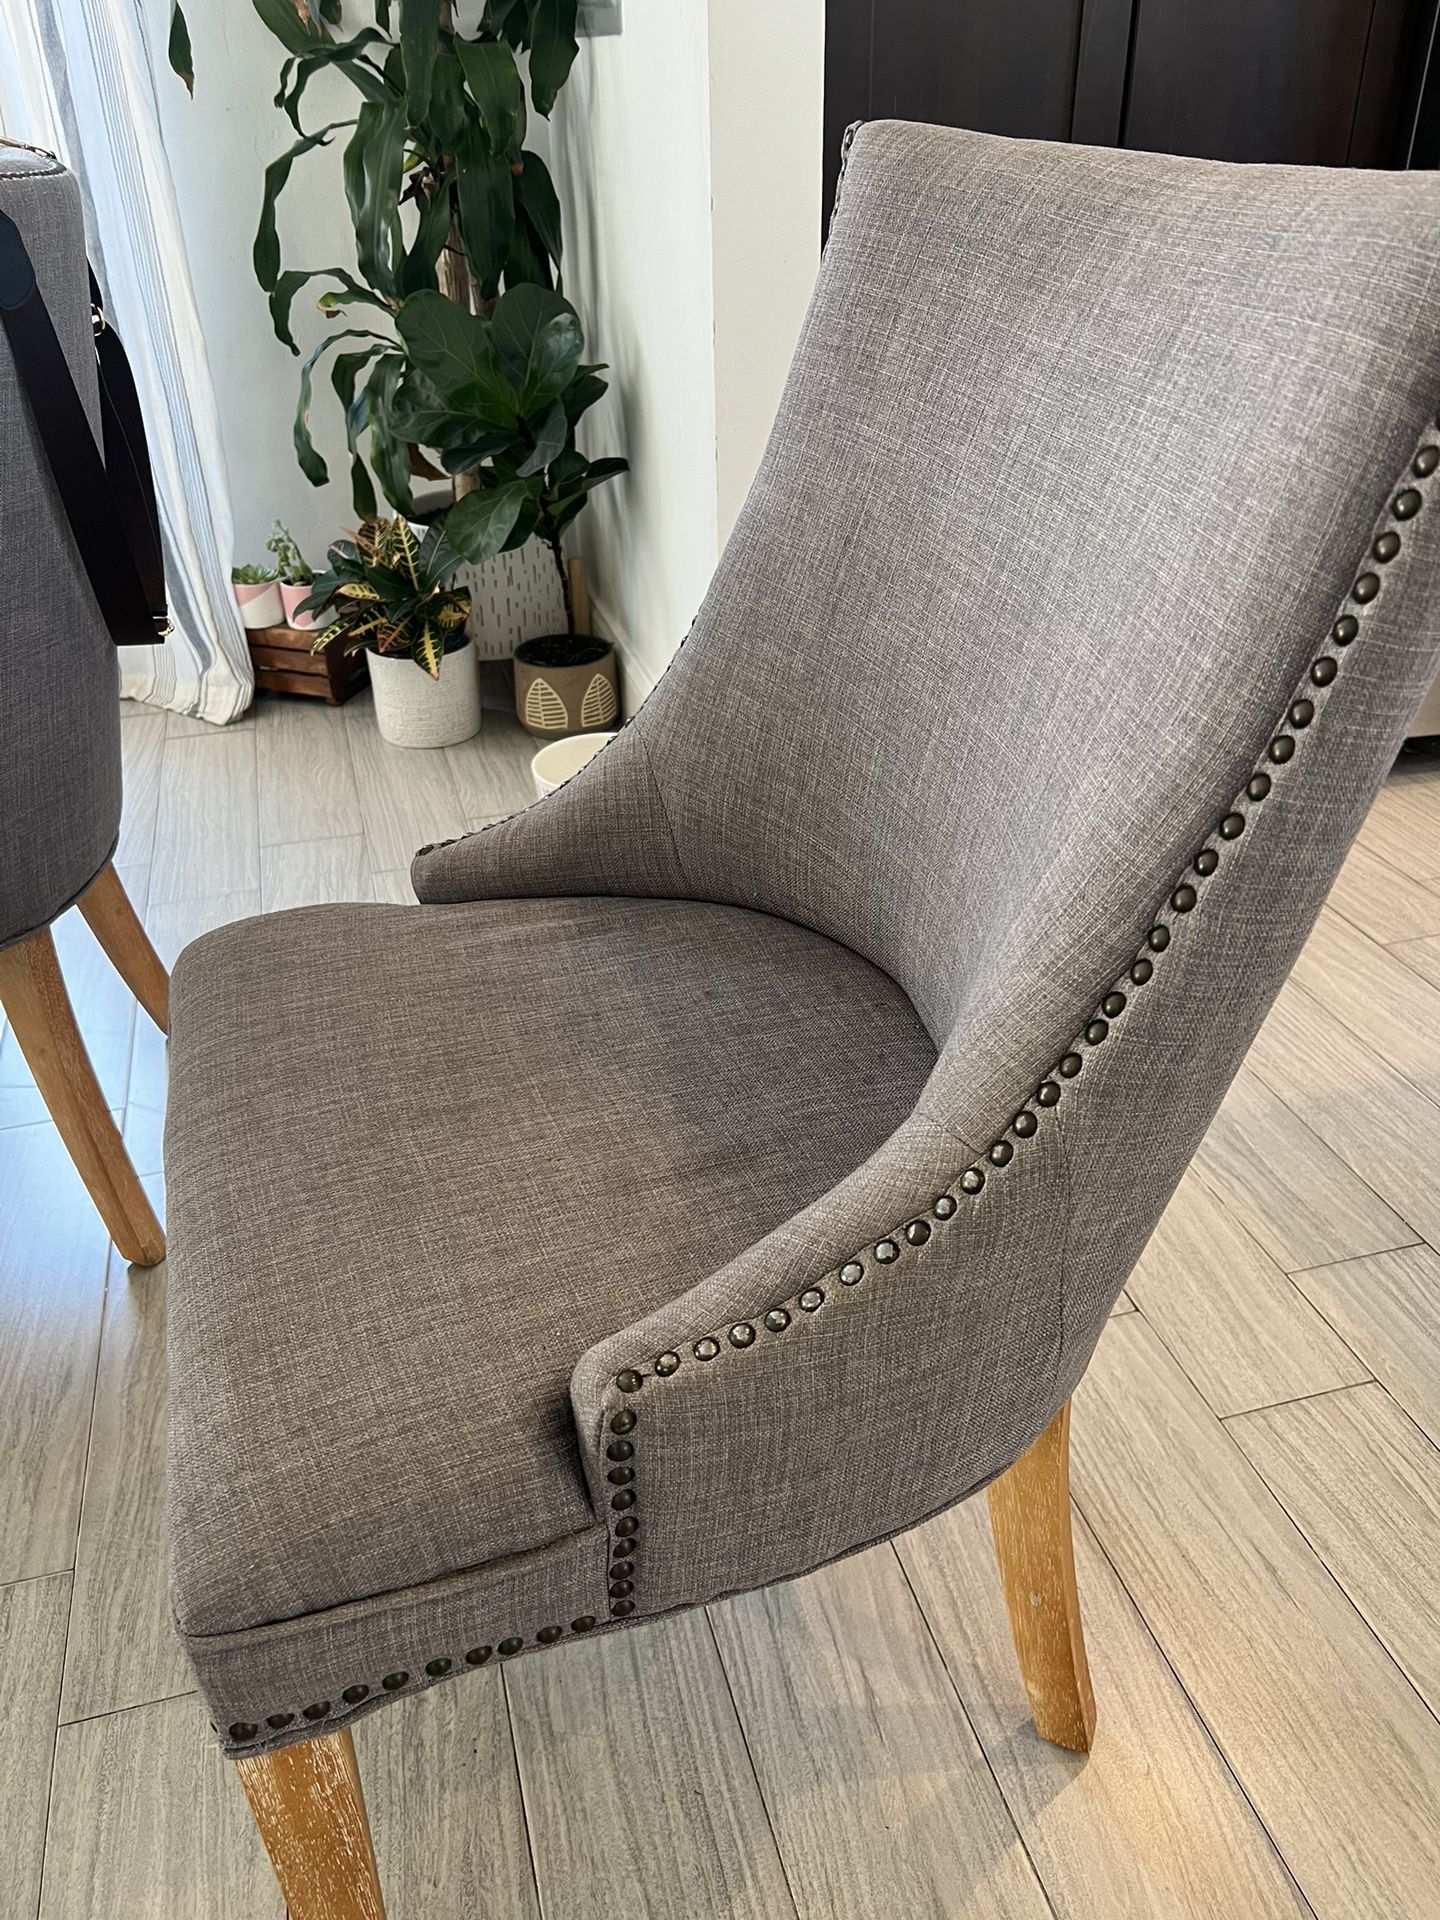 broyhill upholstered chairs